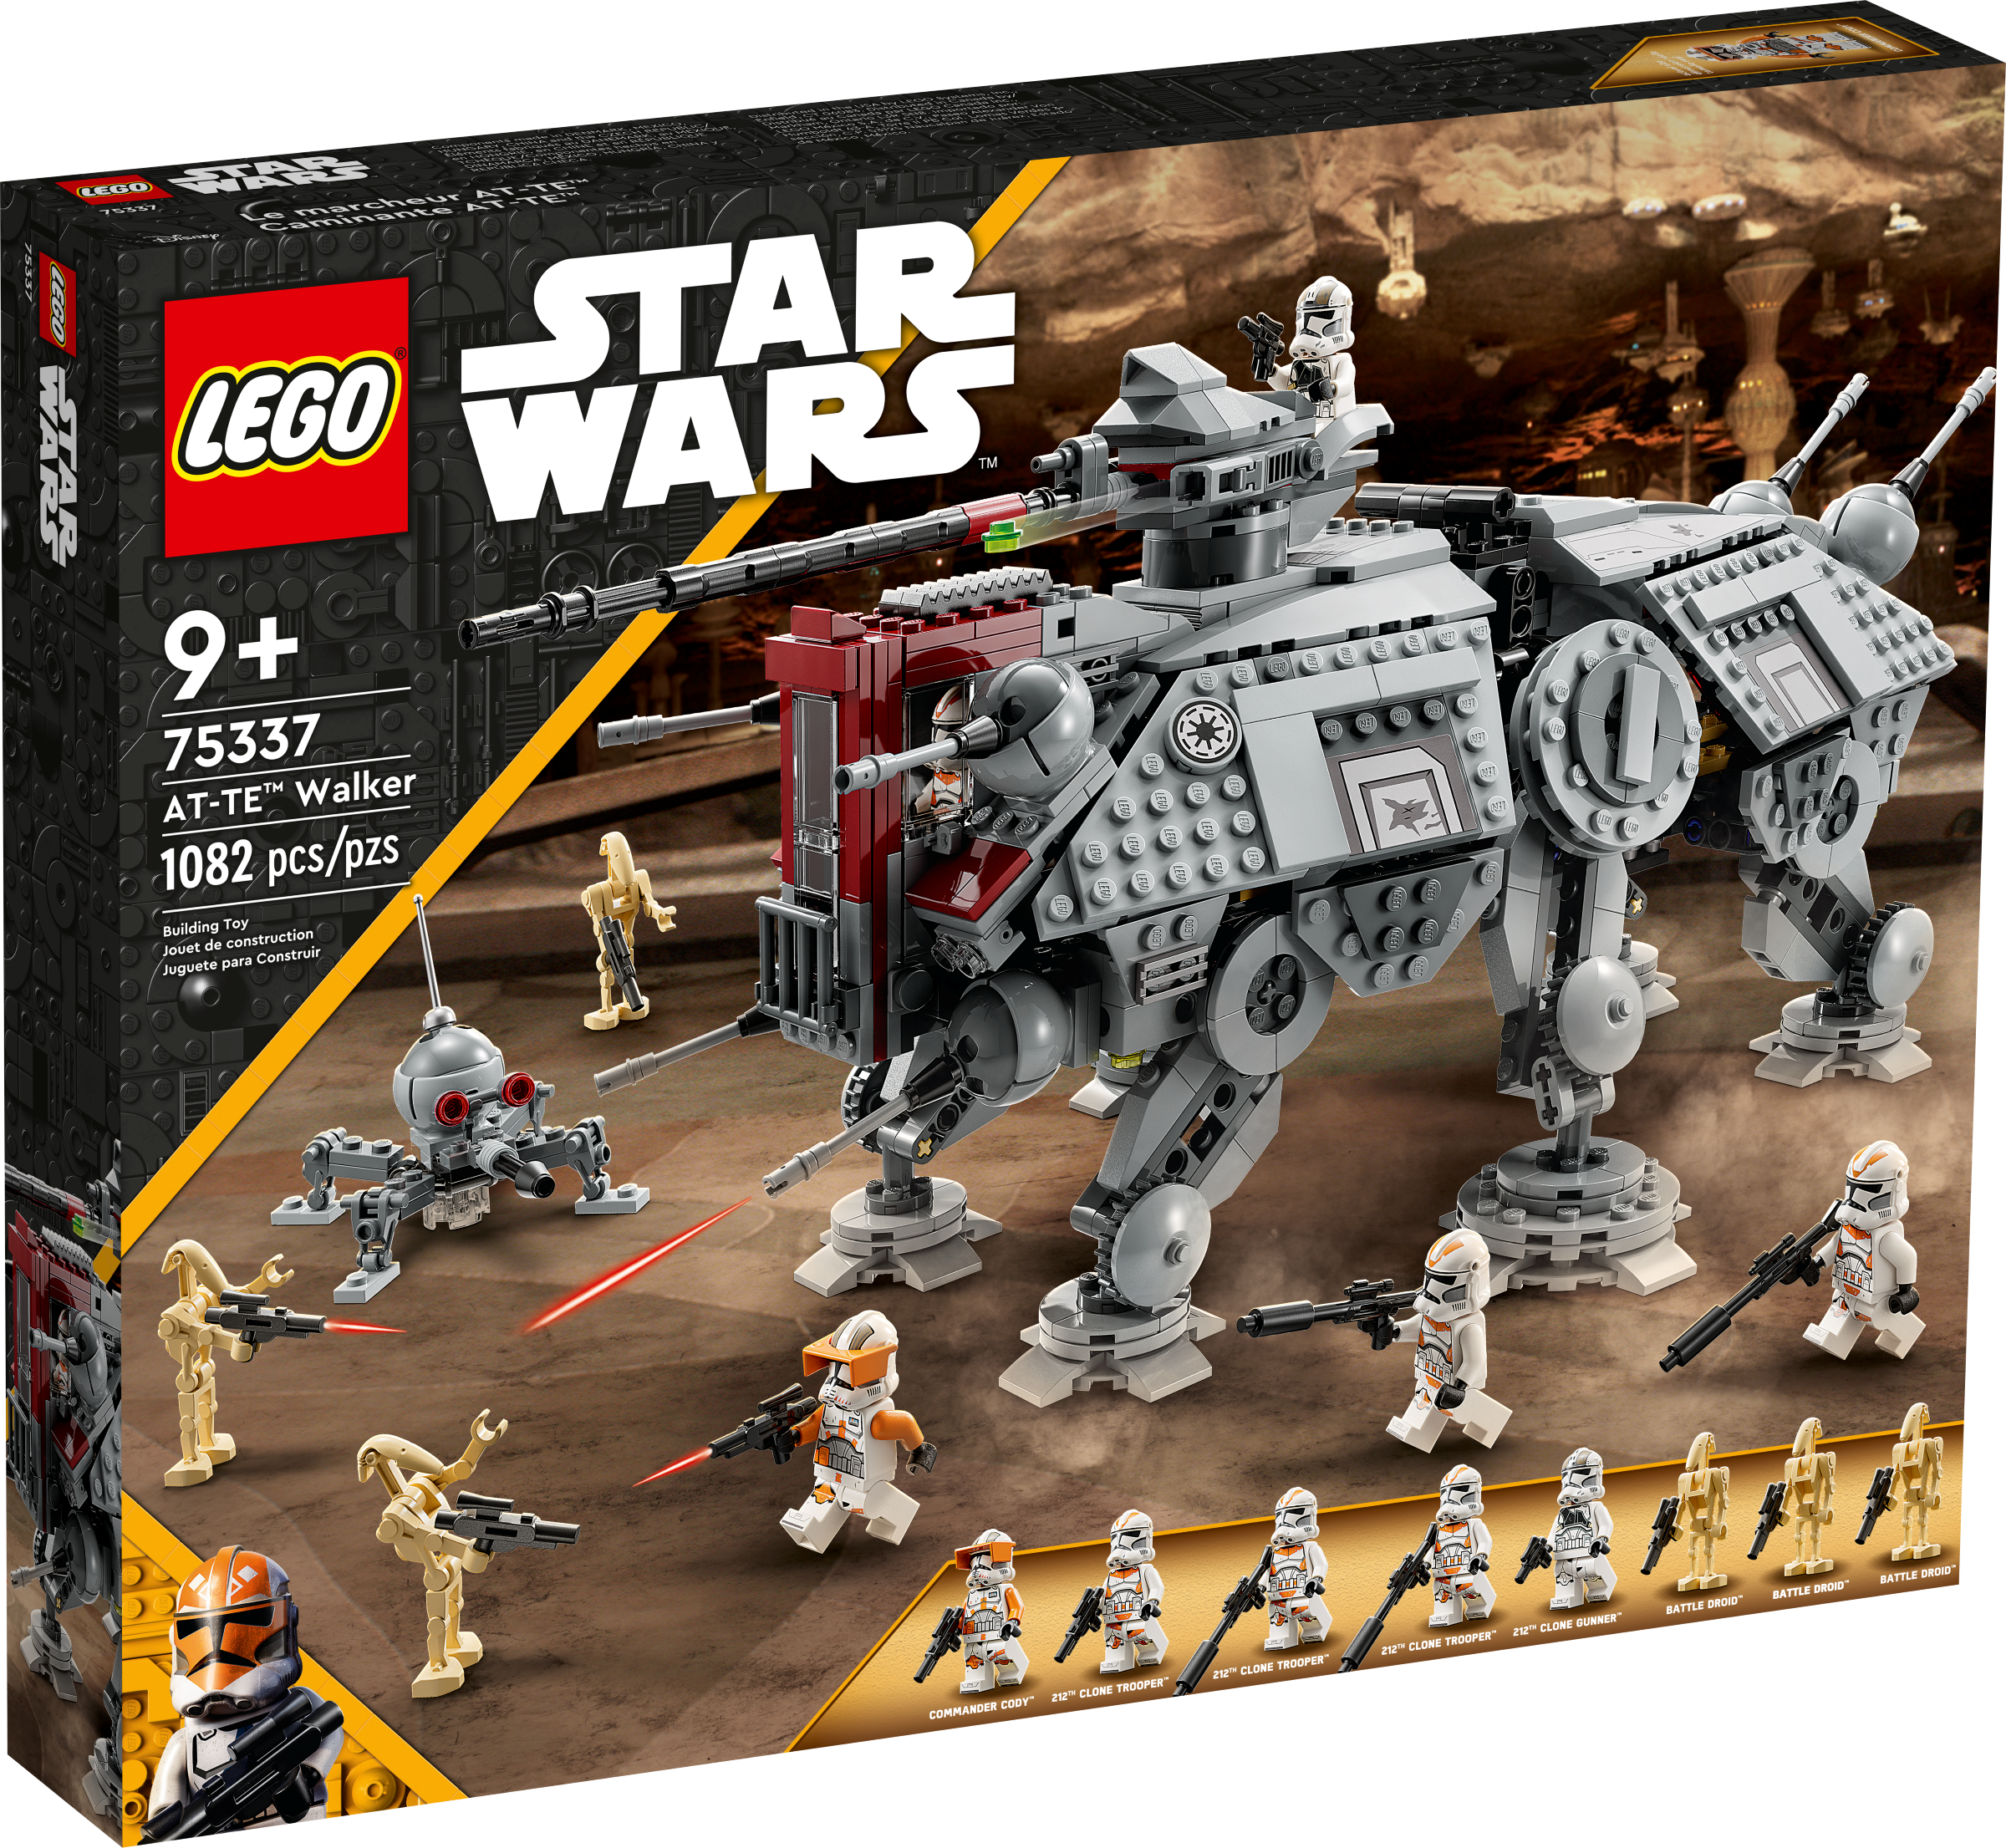 punch graan meesteres Star Wars™ Toys | Official LEGO® Shop US